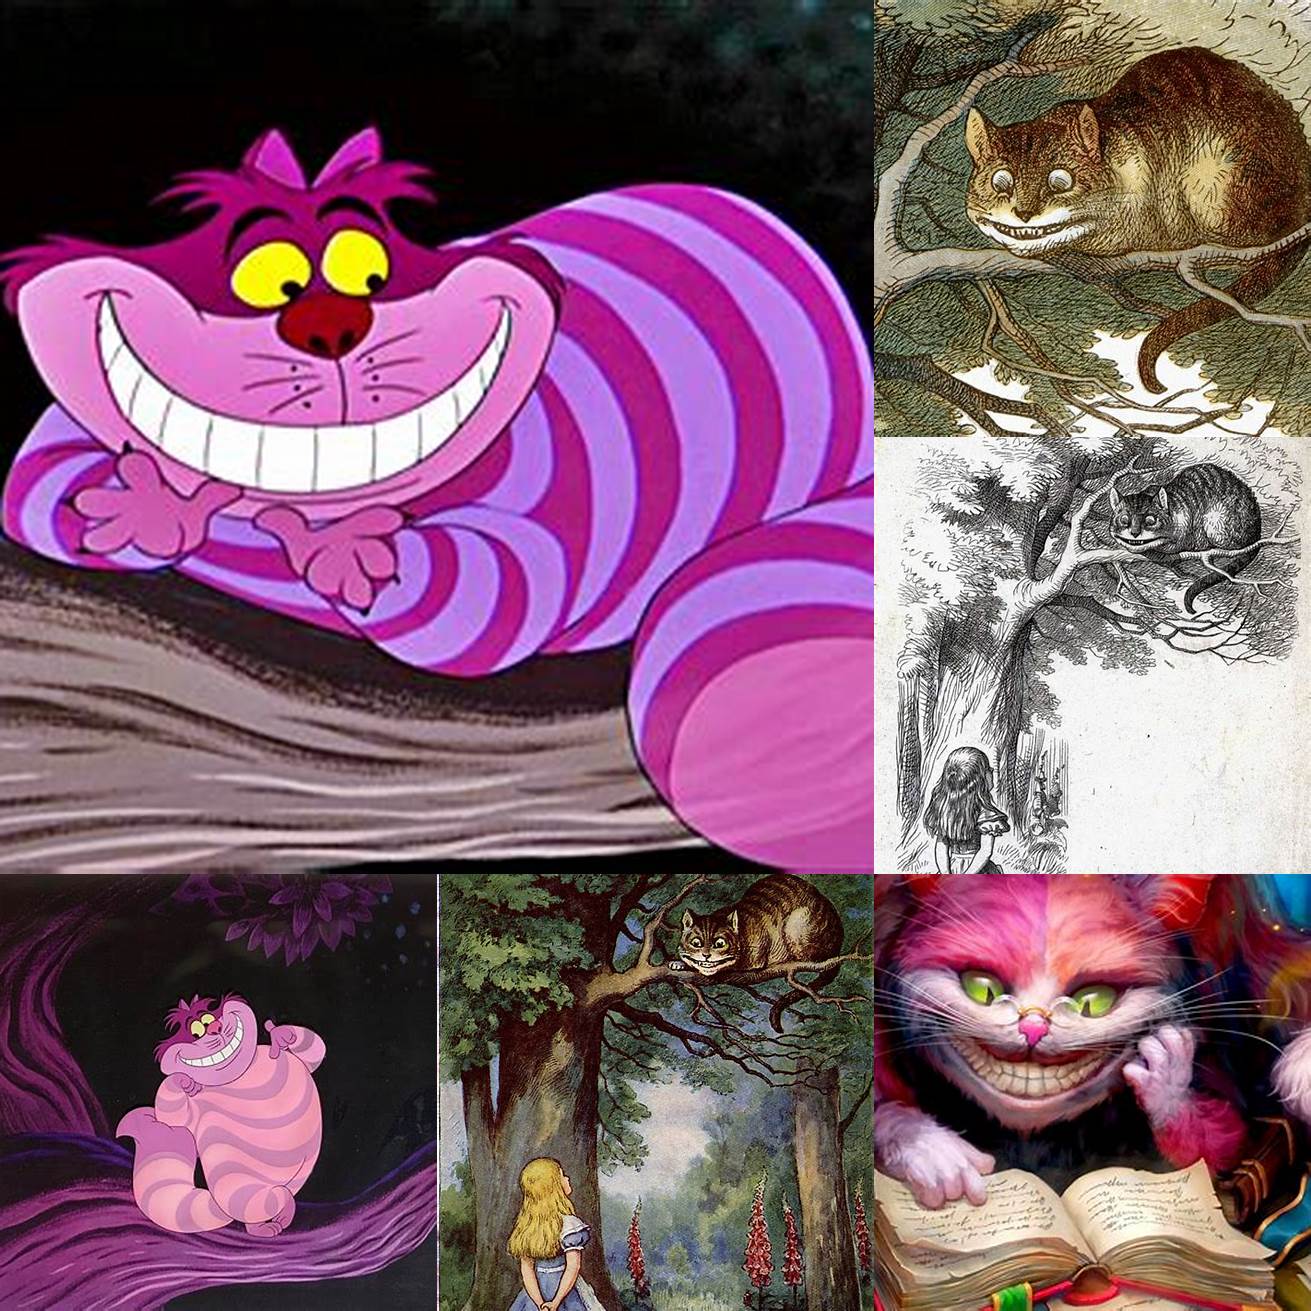 The Cheshire Cat is one of the few characters to appear in both of Lewis Carrolls Alice books